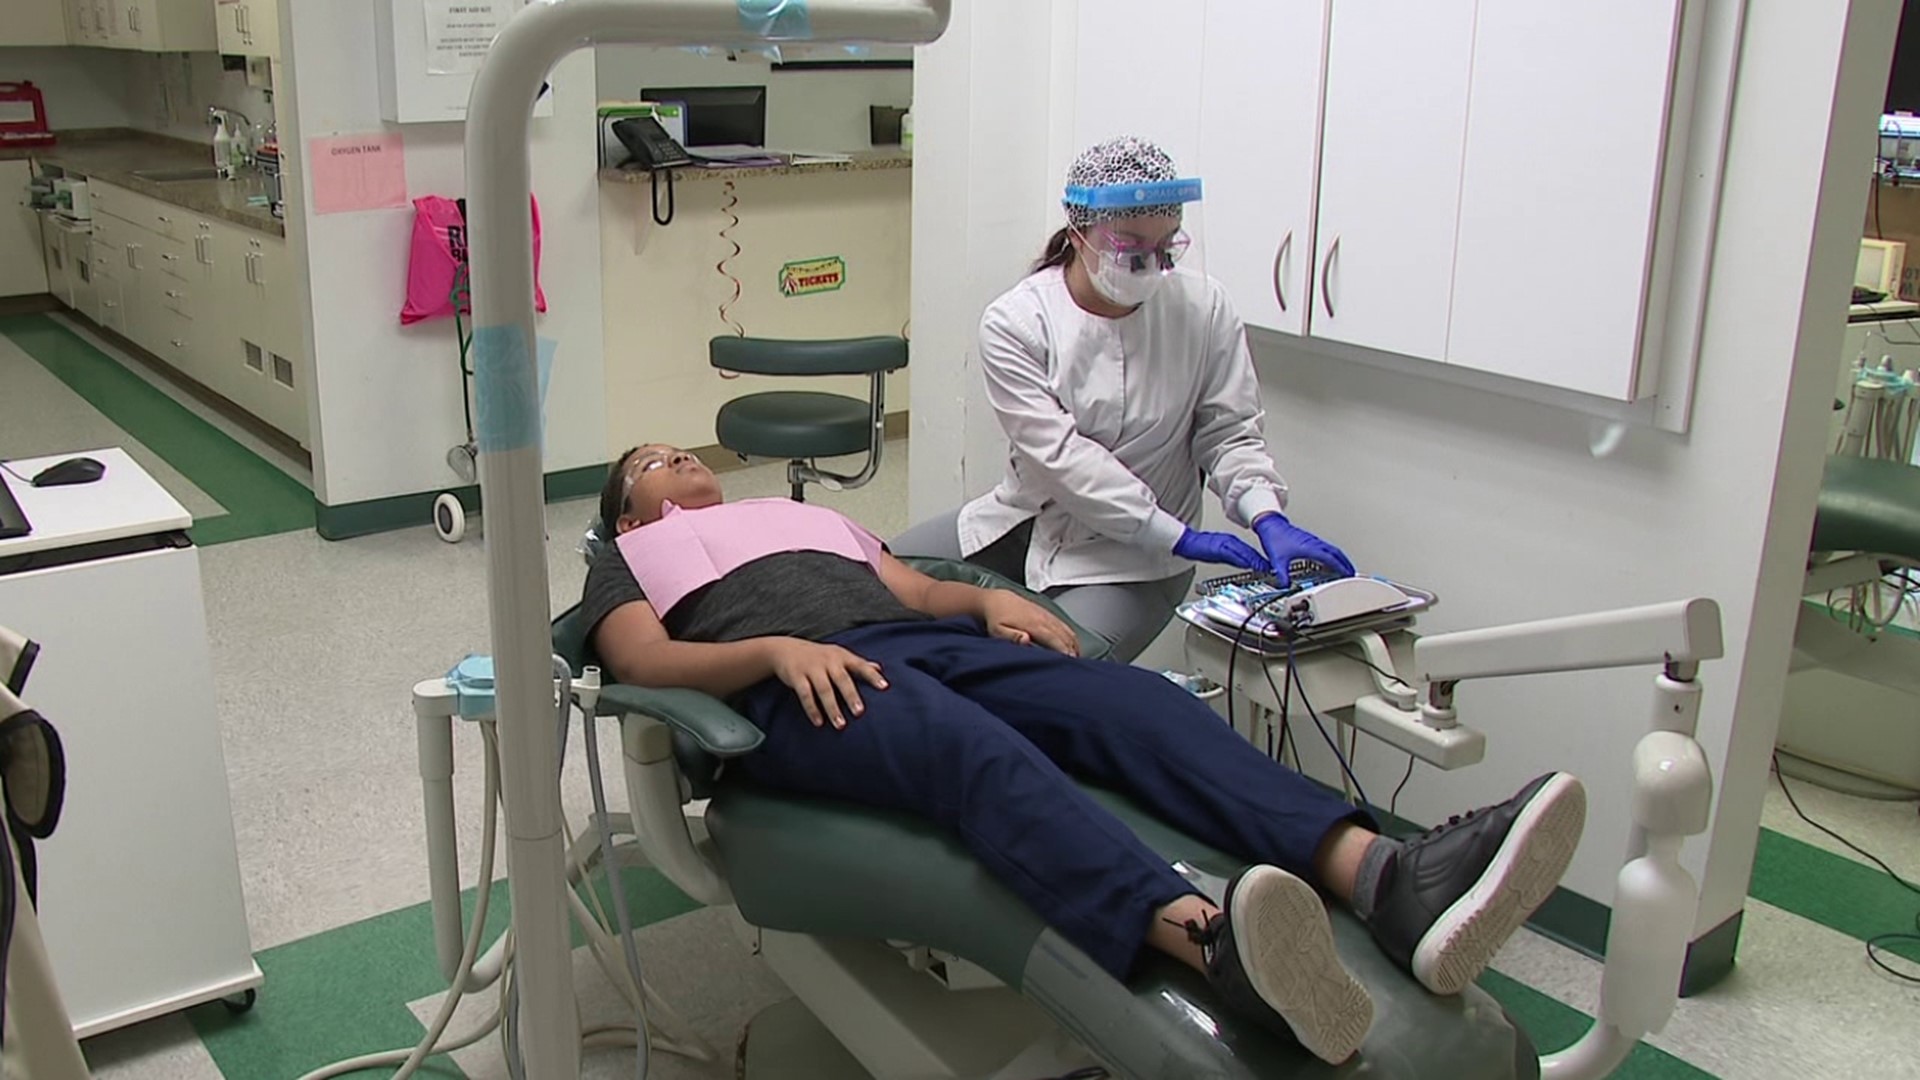 About 50 kids were able to get basic dental care for free as part of the American Dental Association Foundation's 'Give Kids A Smile' program.